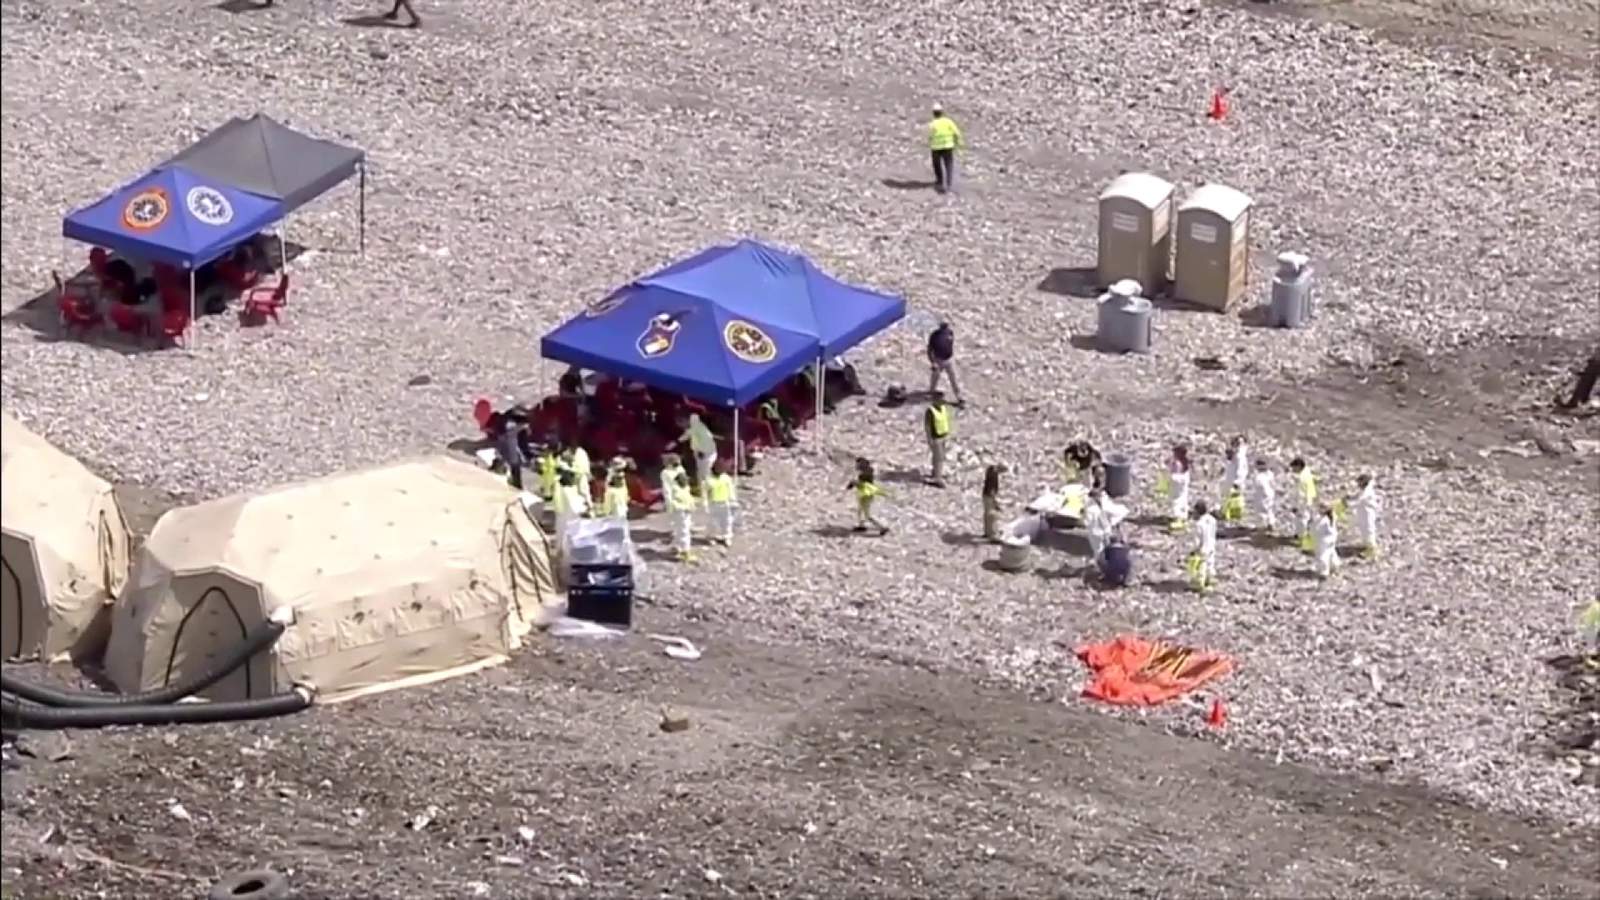 Day 2: Investigators back at landfill searching for clues in Leila Cavett’s disappearance